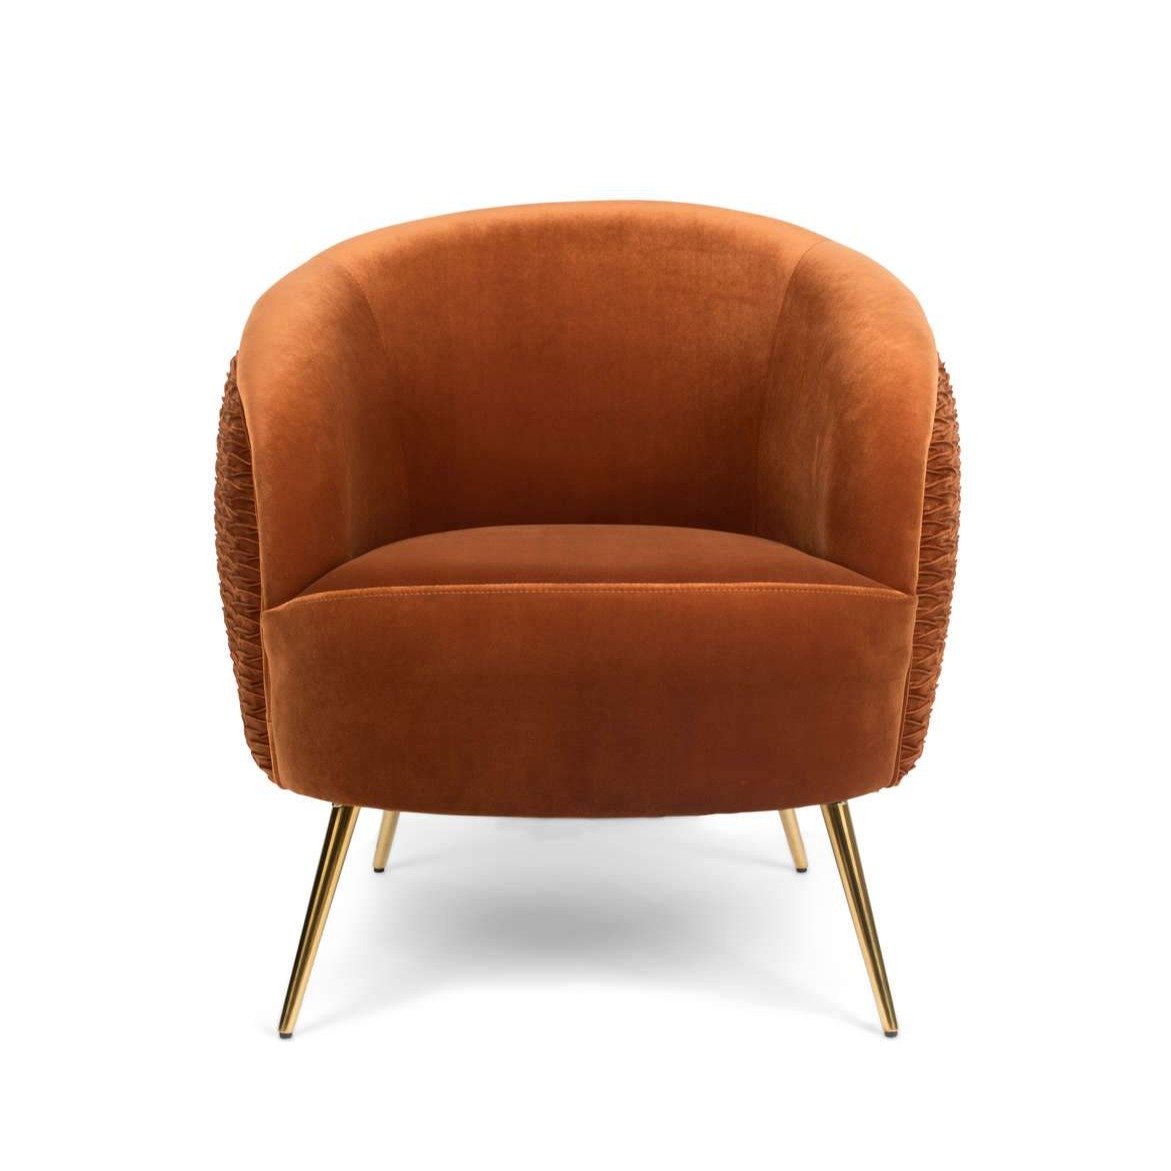 A seating armchair with a personality that attracts attention. Rich, velvety upholstery, impeccable rounding and textured backrest are his hallmarks. So Curvy should not sit quietly in the corner.